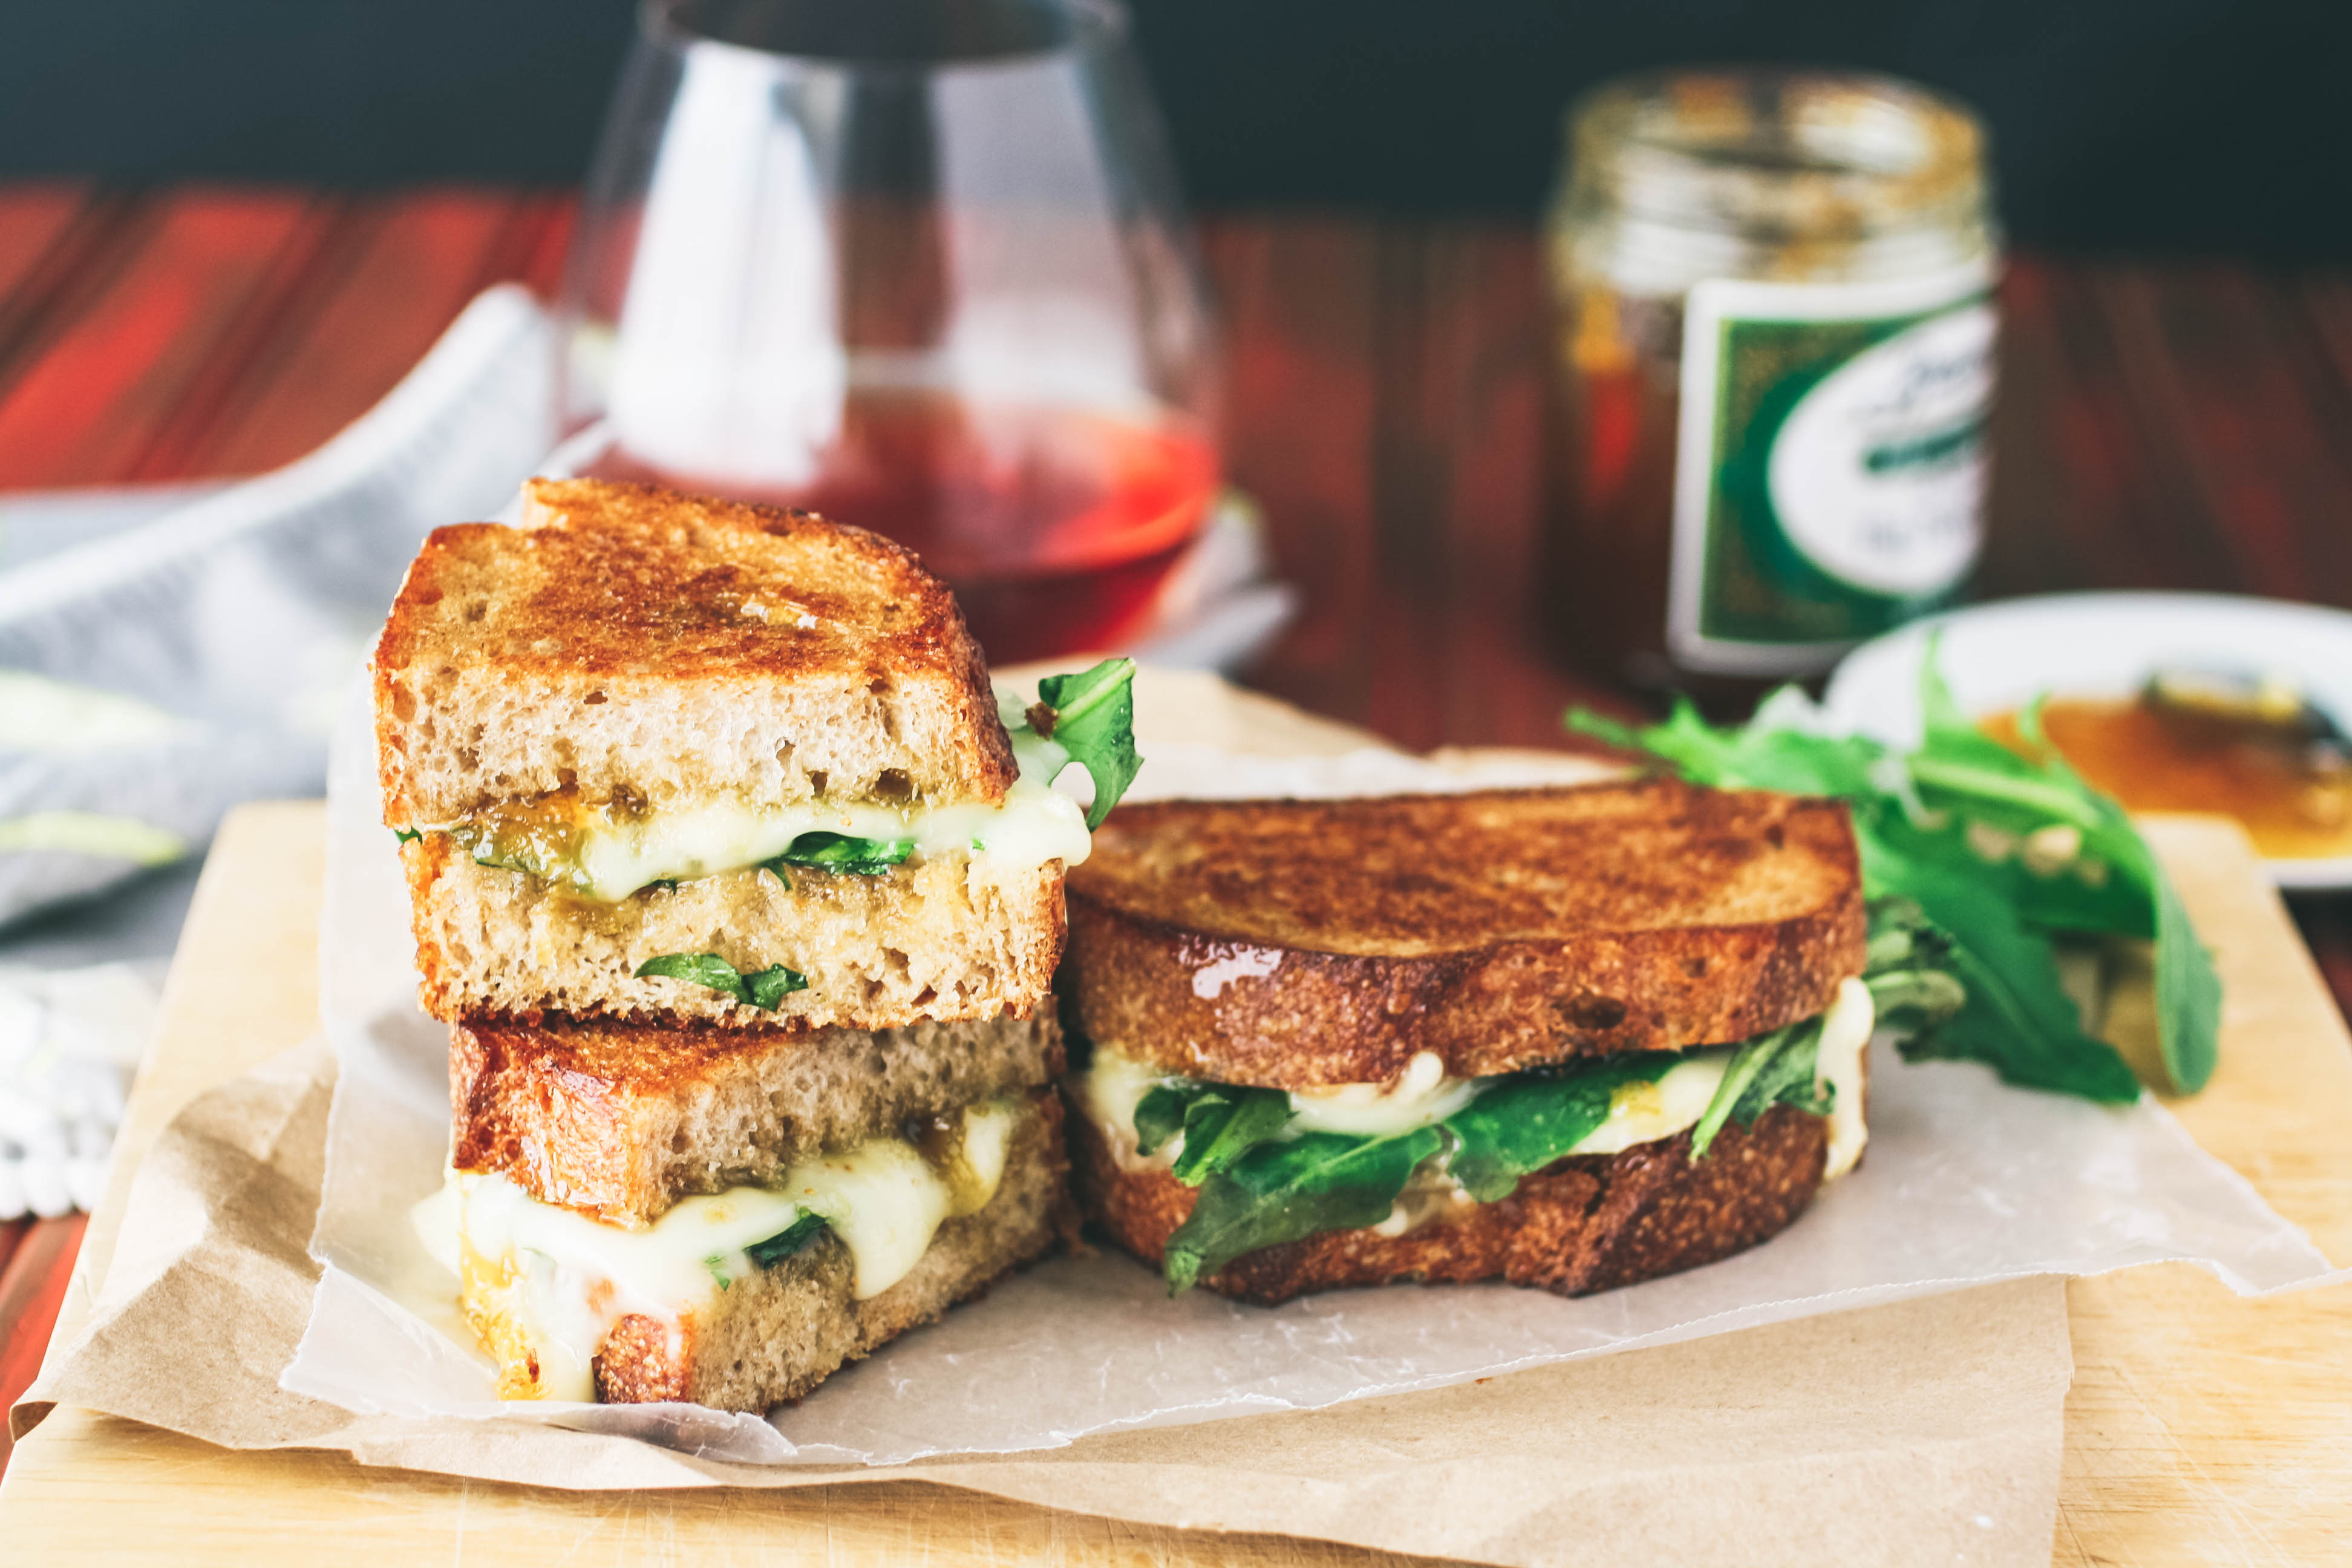 Grilled Brie, Fig Jam, and Dandelion Greens Sandwiches are a treat for when you need a uniquely different and delicious dish! Grilled Brie, Fig Jam, and Dandelion Greens Sandwiches make a fun and flavorful meal. 